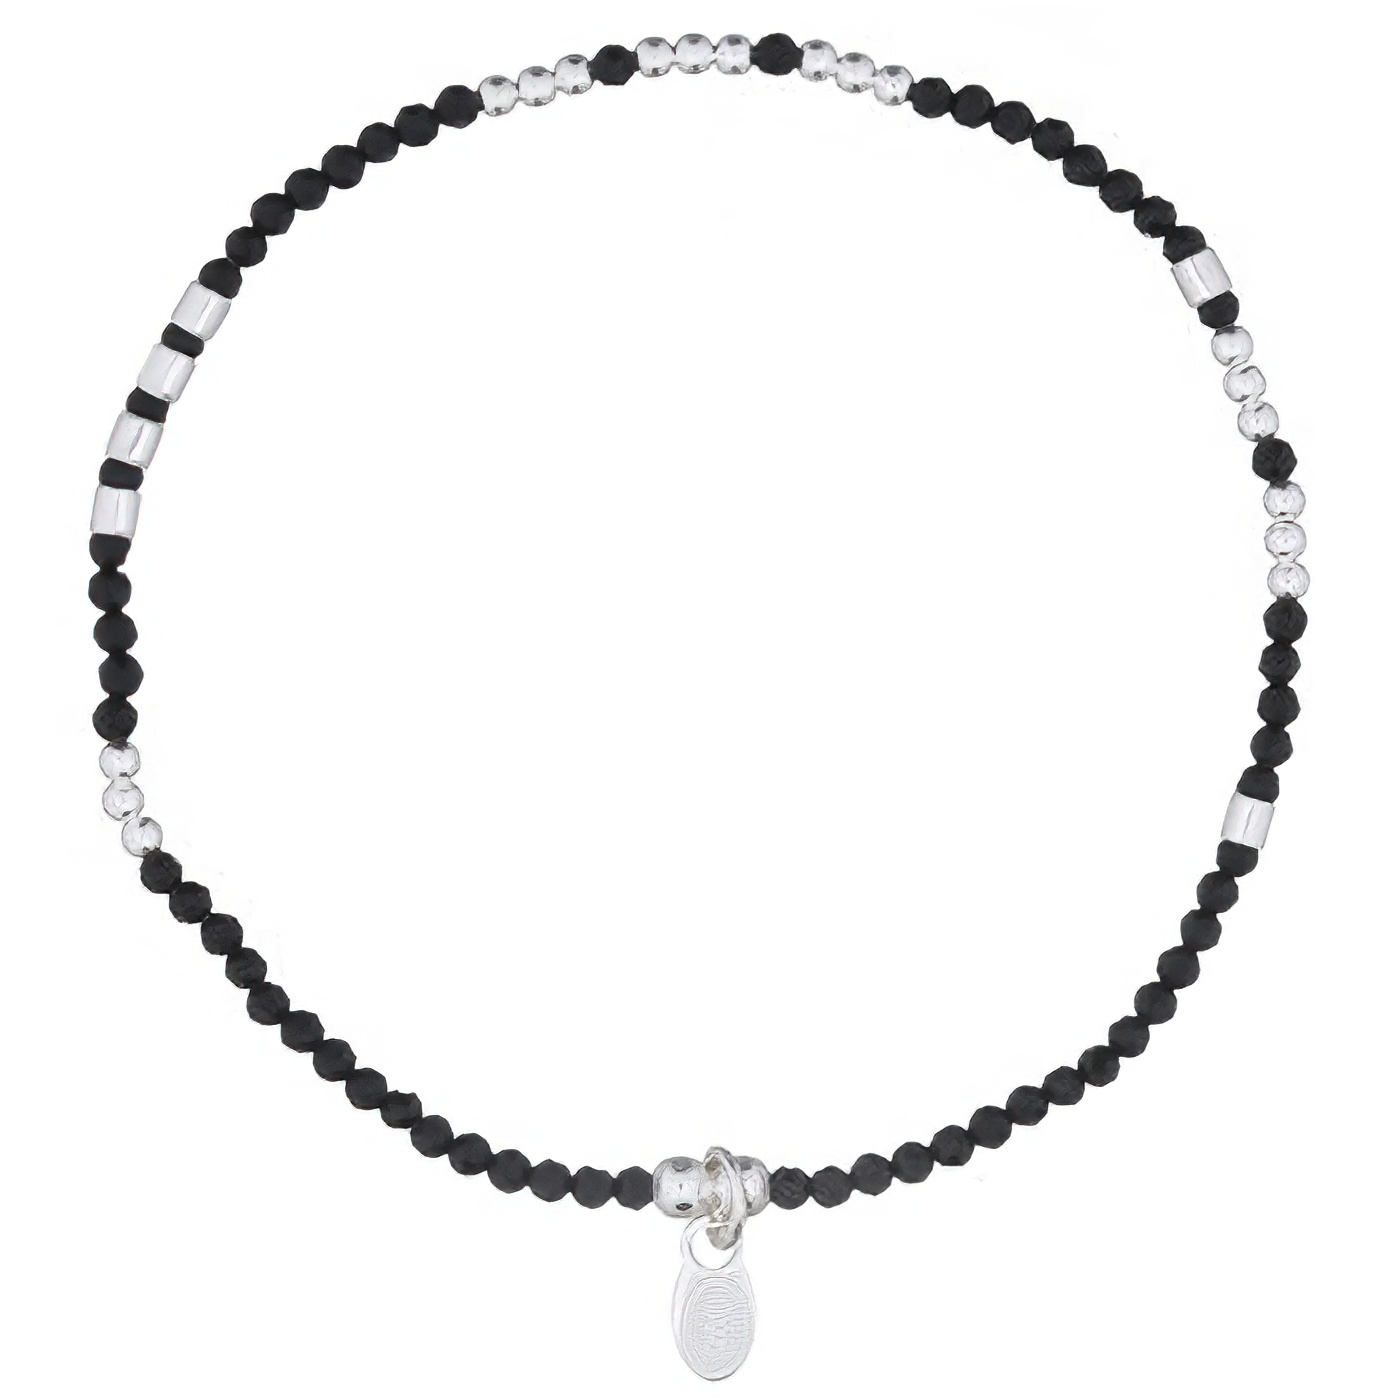 Black Agate And 925 Silver Beads With Charm Stretchable Bracelet by BeYindi 